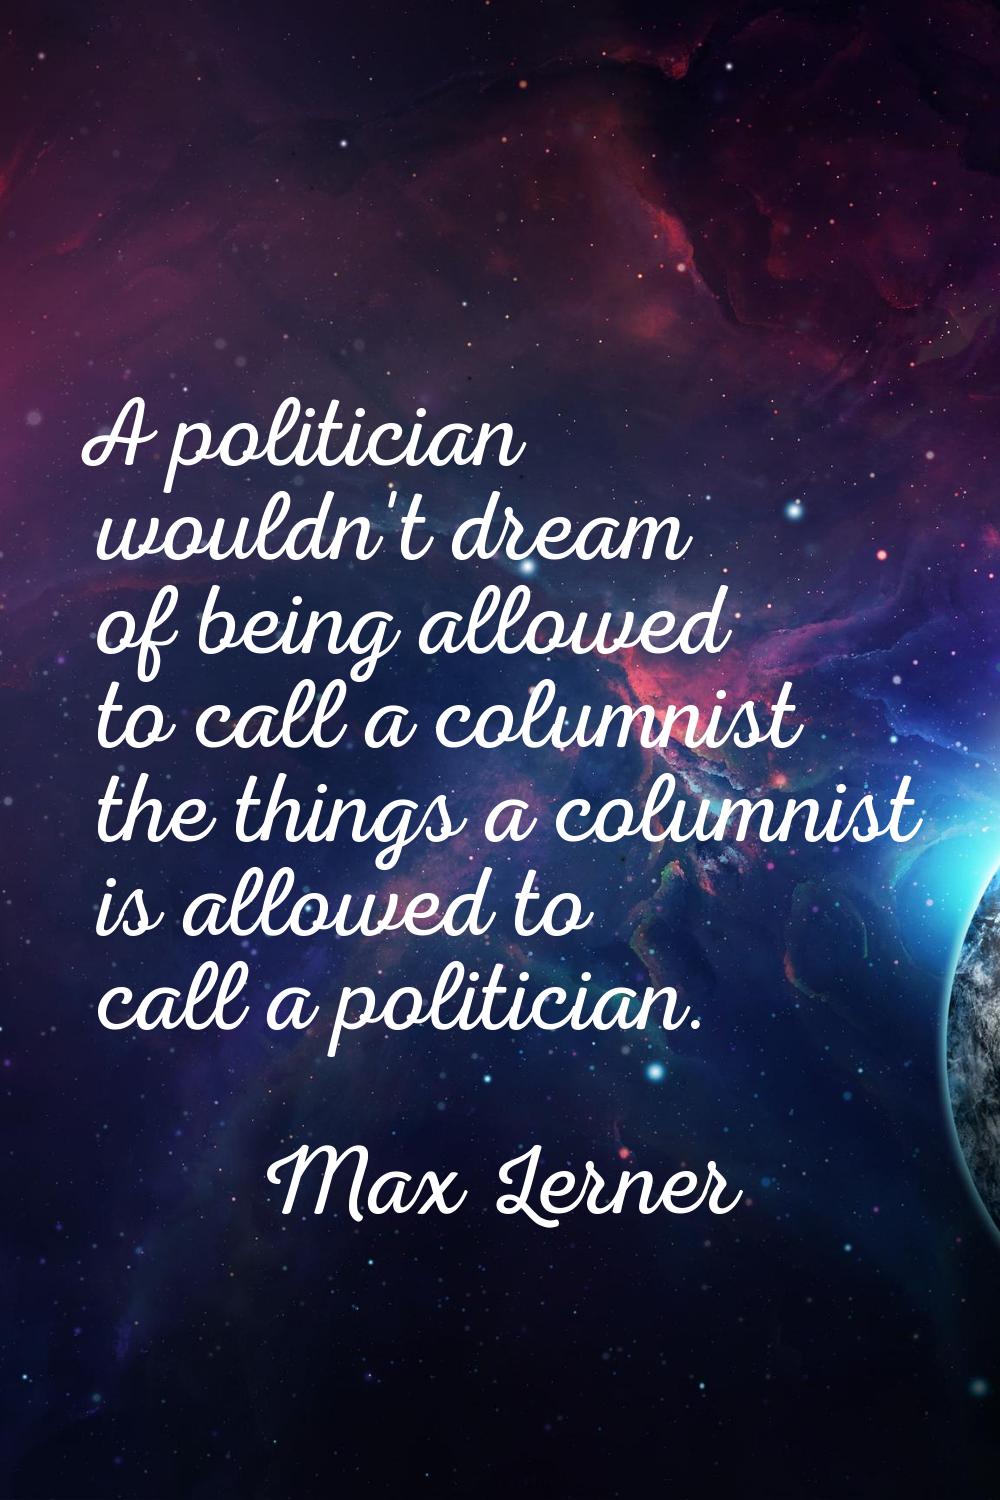 A politician wouldn't dream of being allowed to call a columnist the things a columnist is allowed 